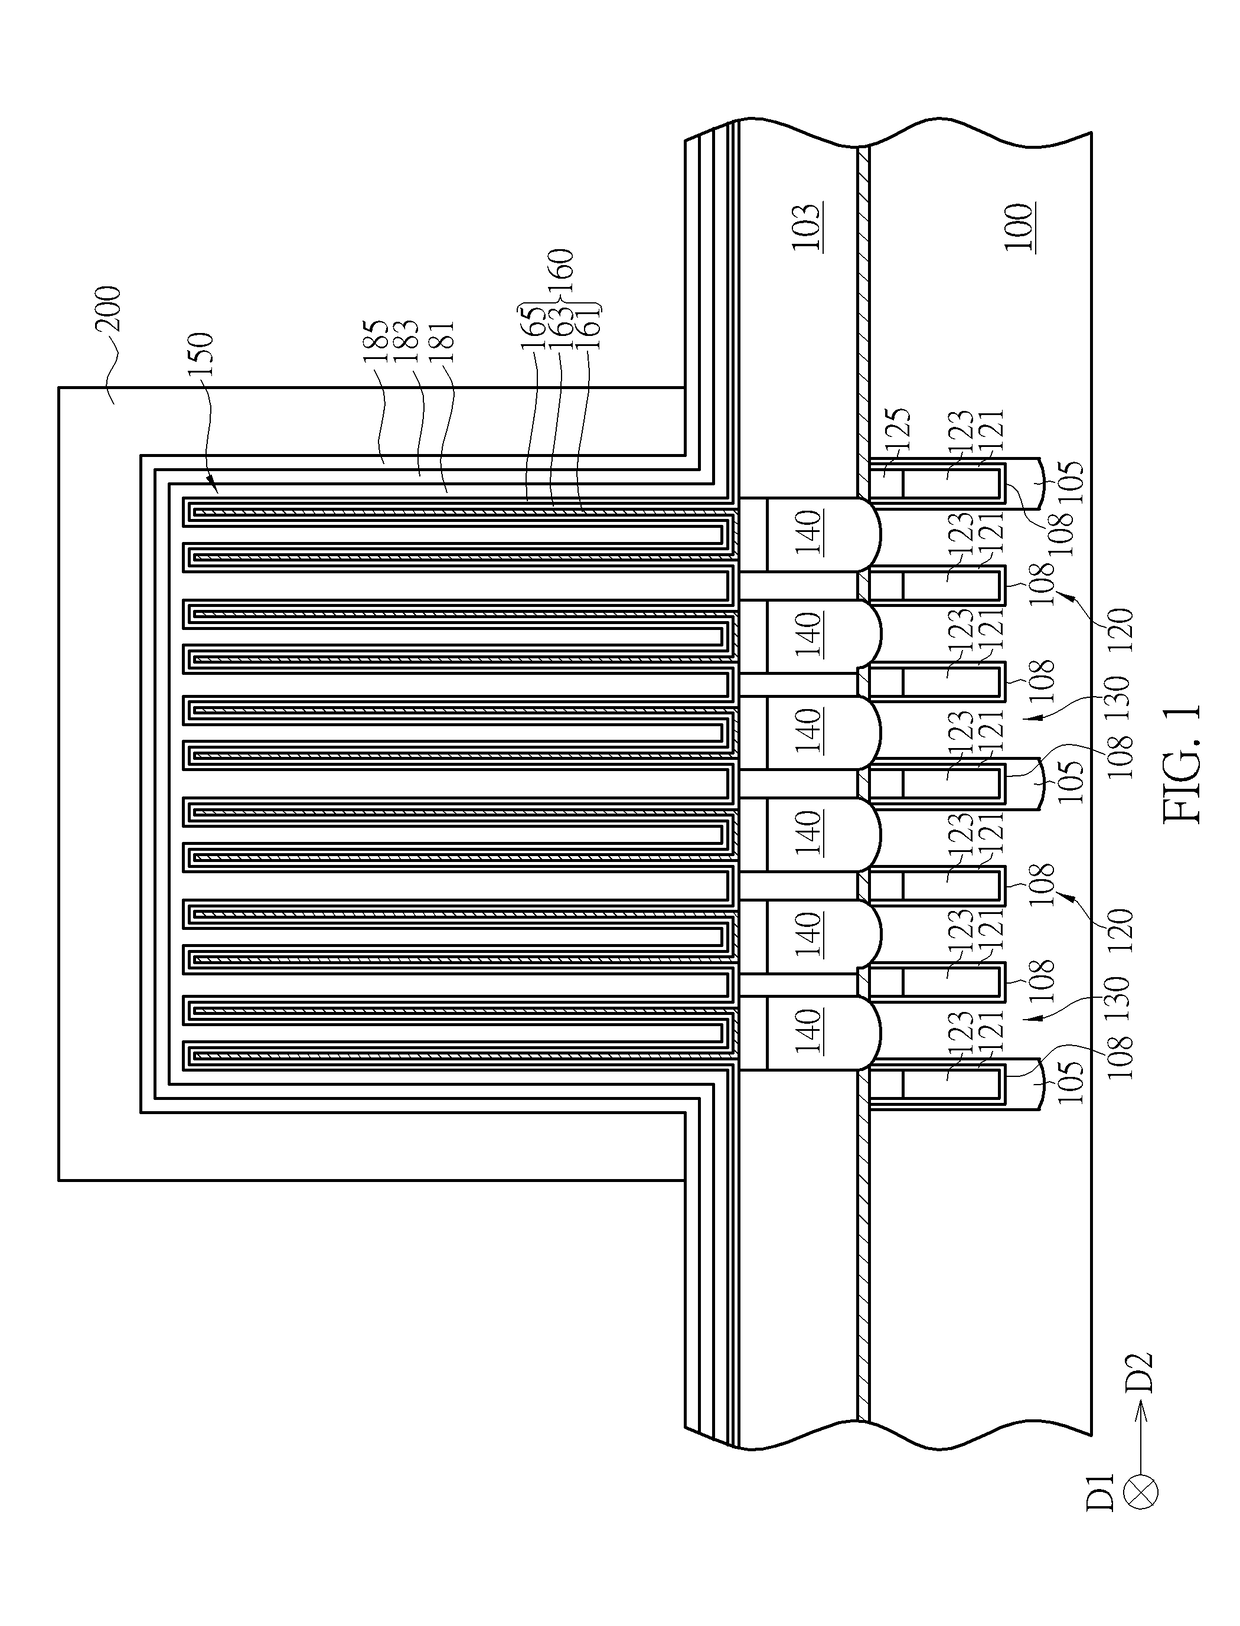 Semiconductor memory device and method of forming the same